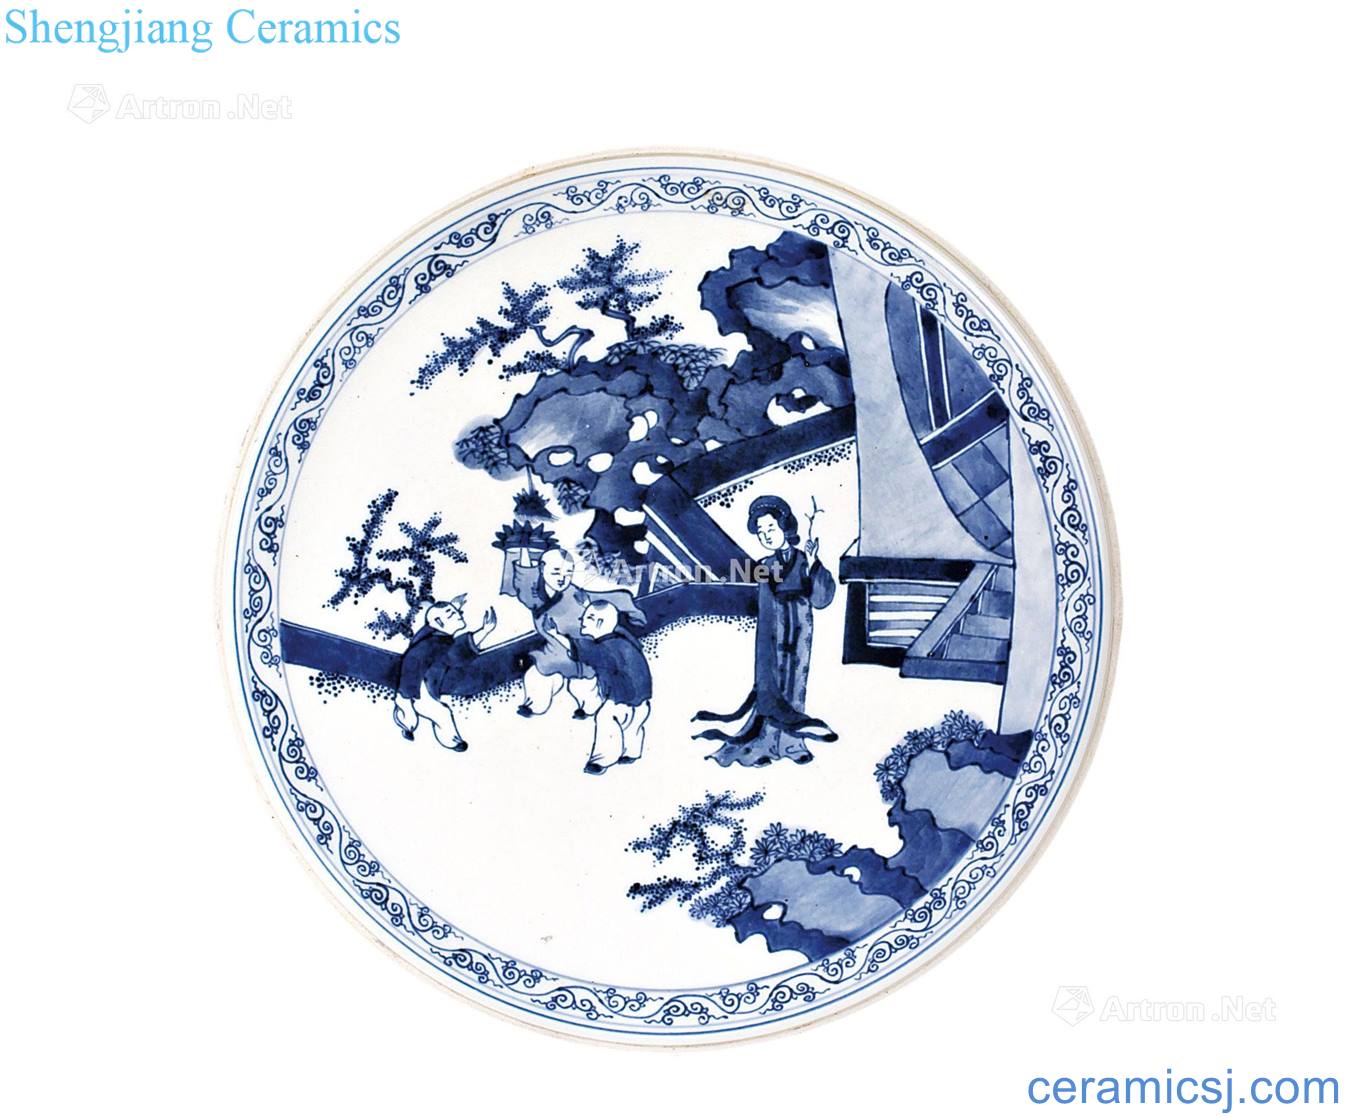 Blue and white baby play figure of the reign of emperor kangxi porcelain plate